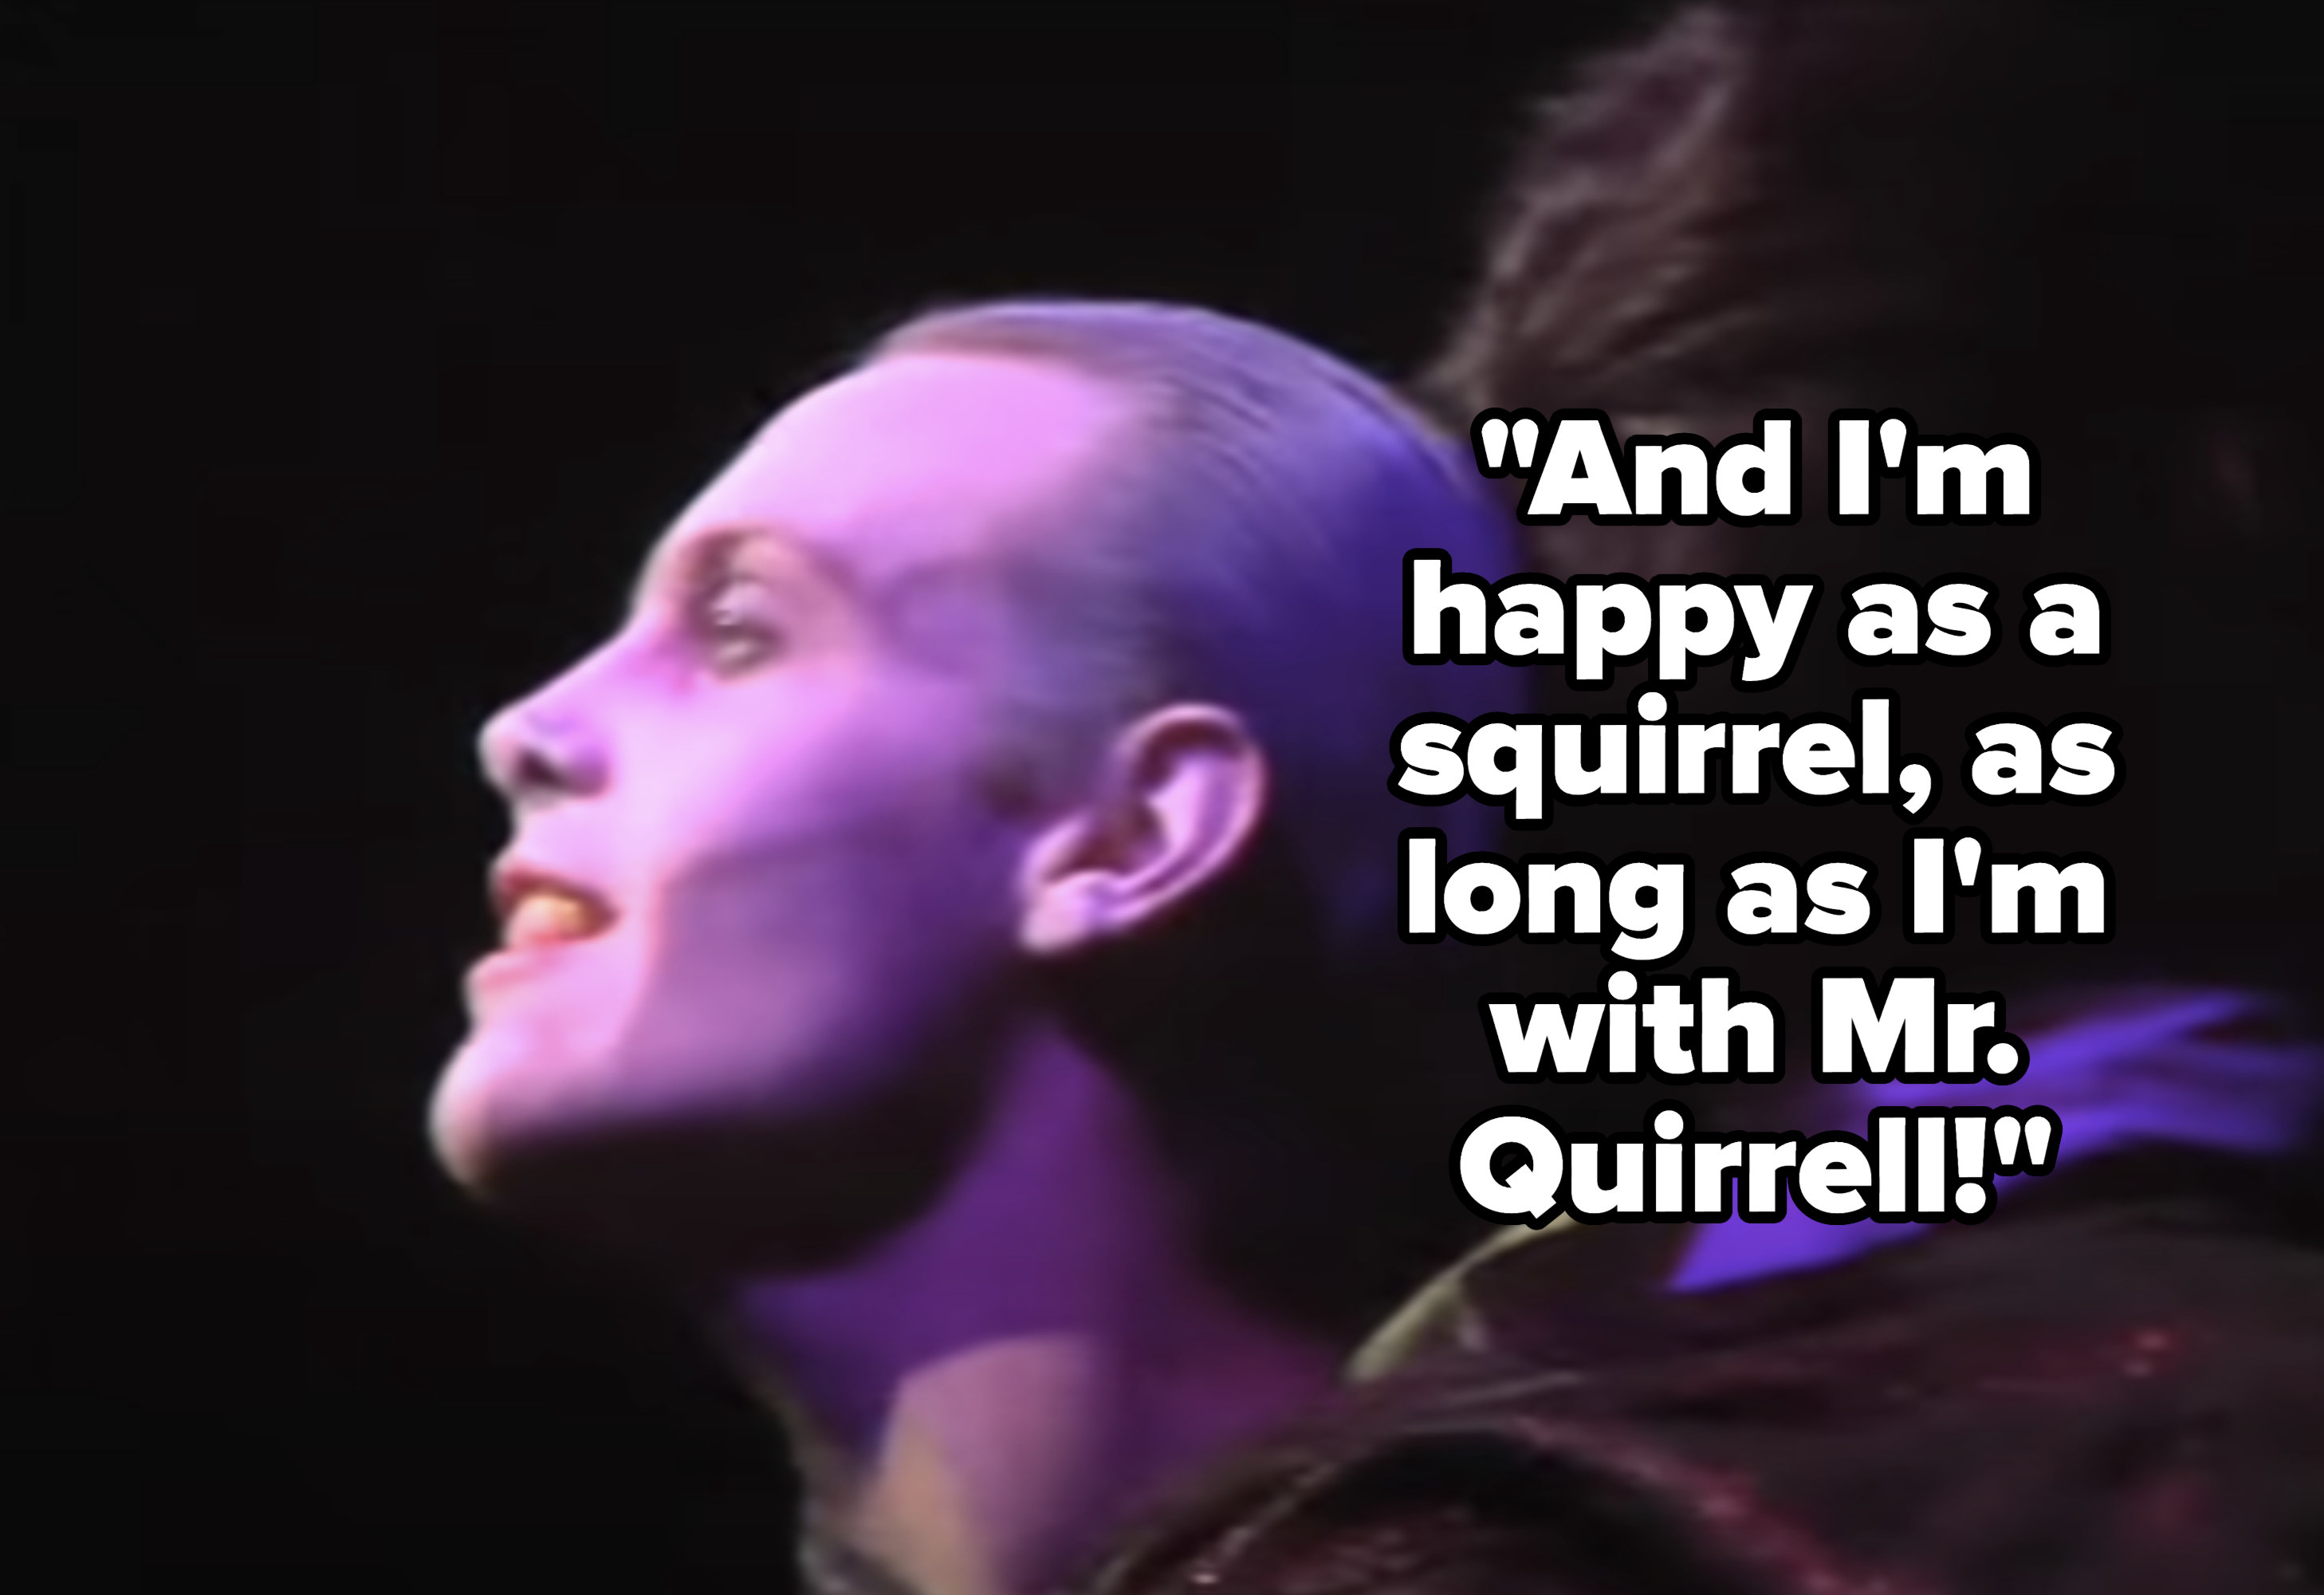 Voldemort: &quot;And I&#x27;m happy as a squirrel, as long as I&#x27;m with Mr. Quirrell!&quot;